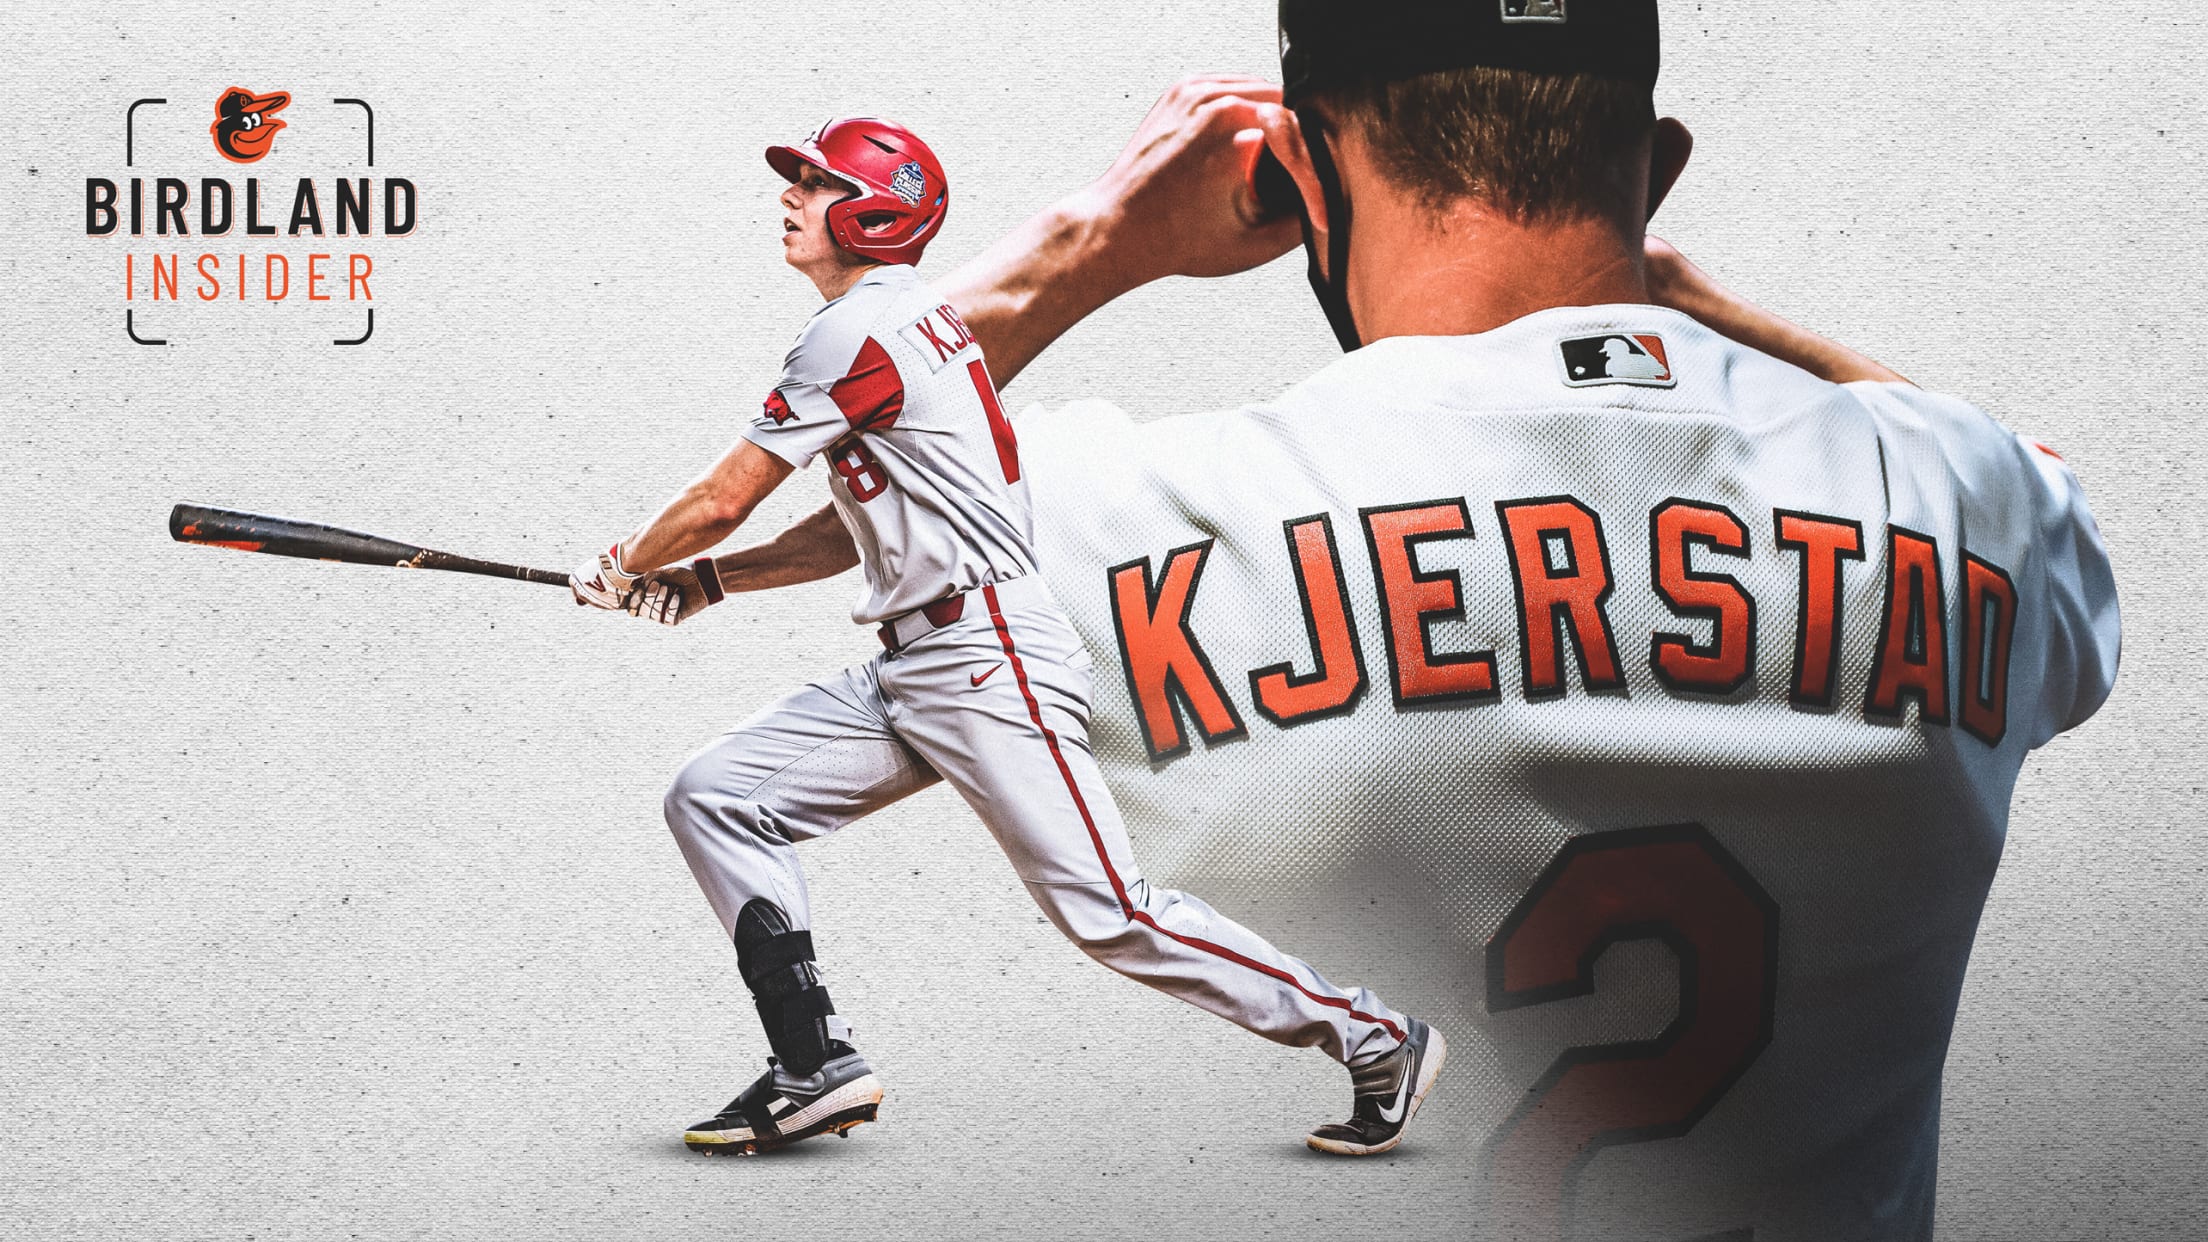 Kjerstad drafted No. 2 overall by Orioles